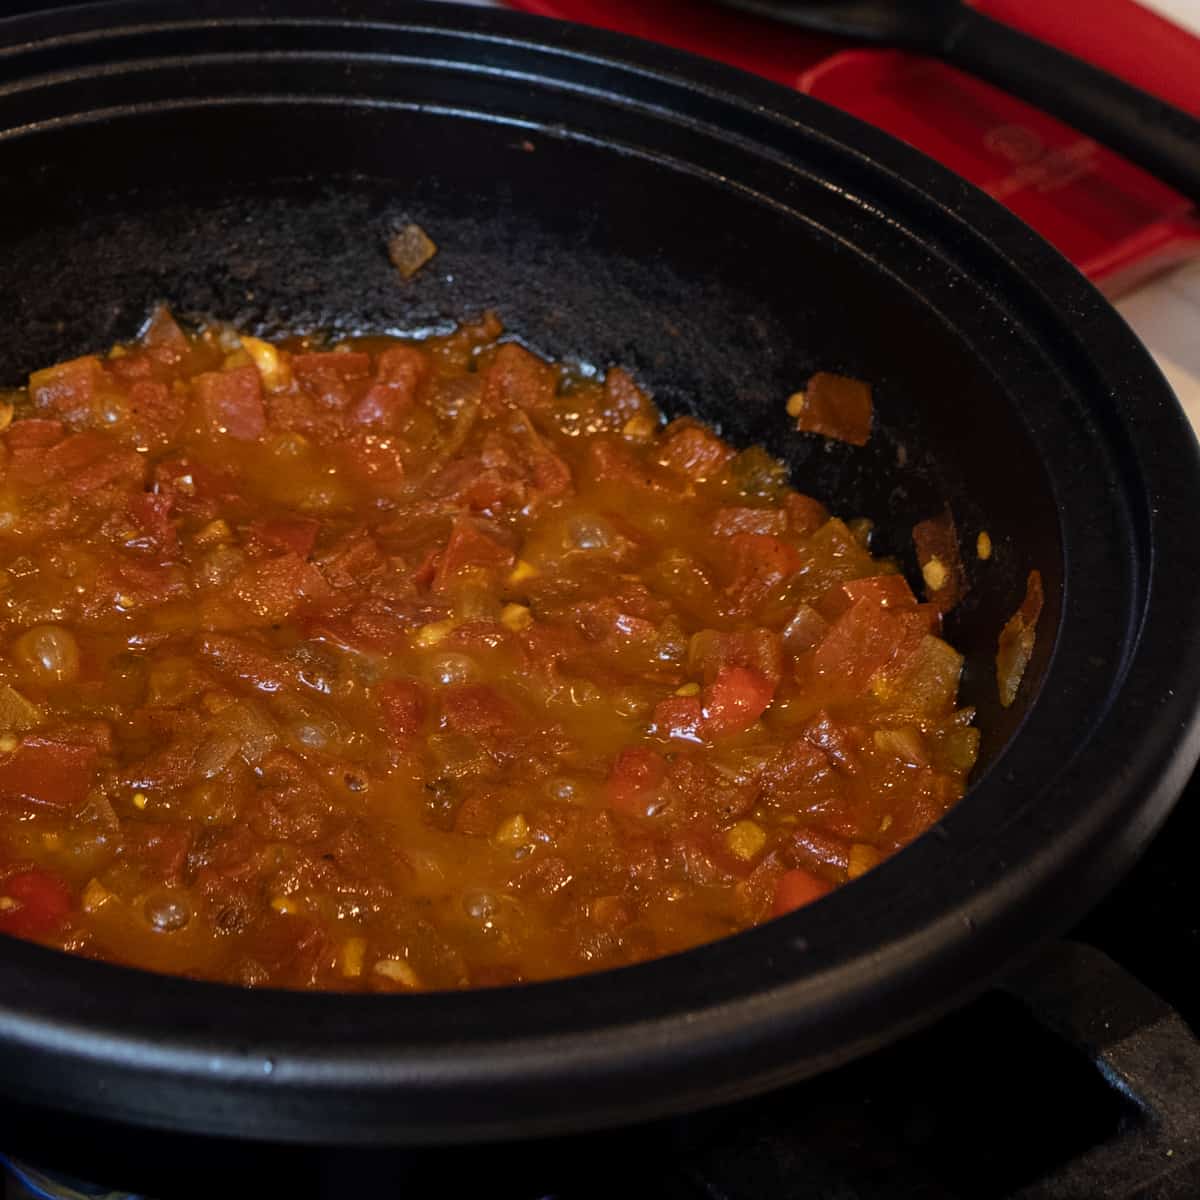 Tomatoes simmering in a cast iron skillet.